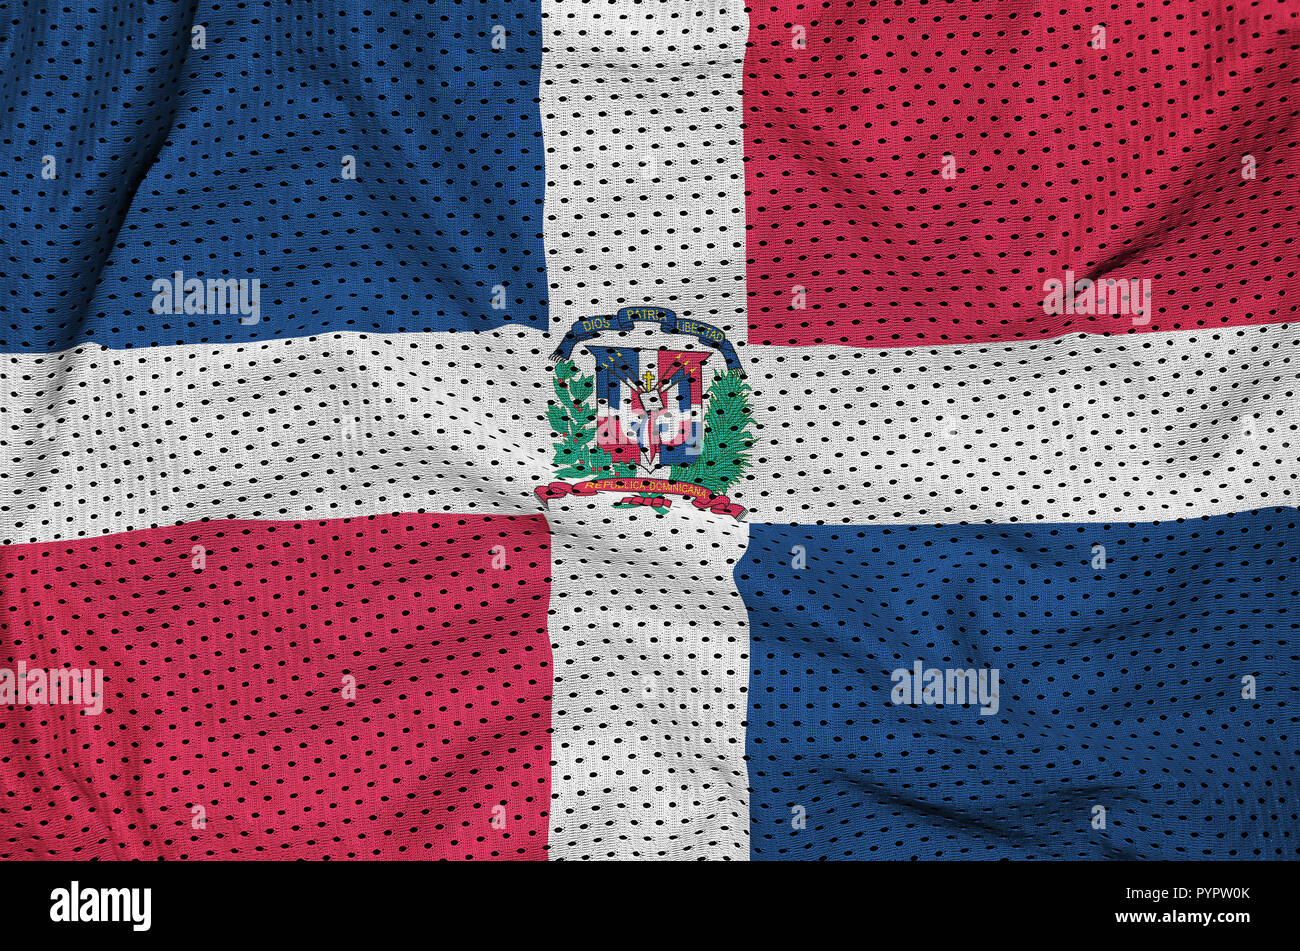 Dominican Republic flag printed on a polyester nylon sportswear mesh fabric with some folds Stock Photo